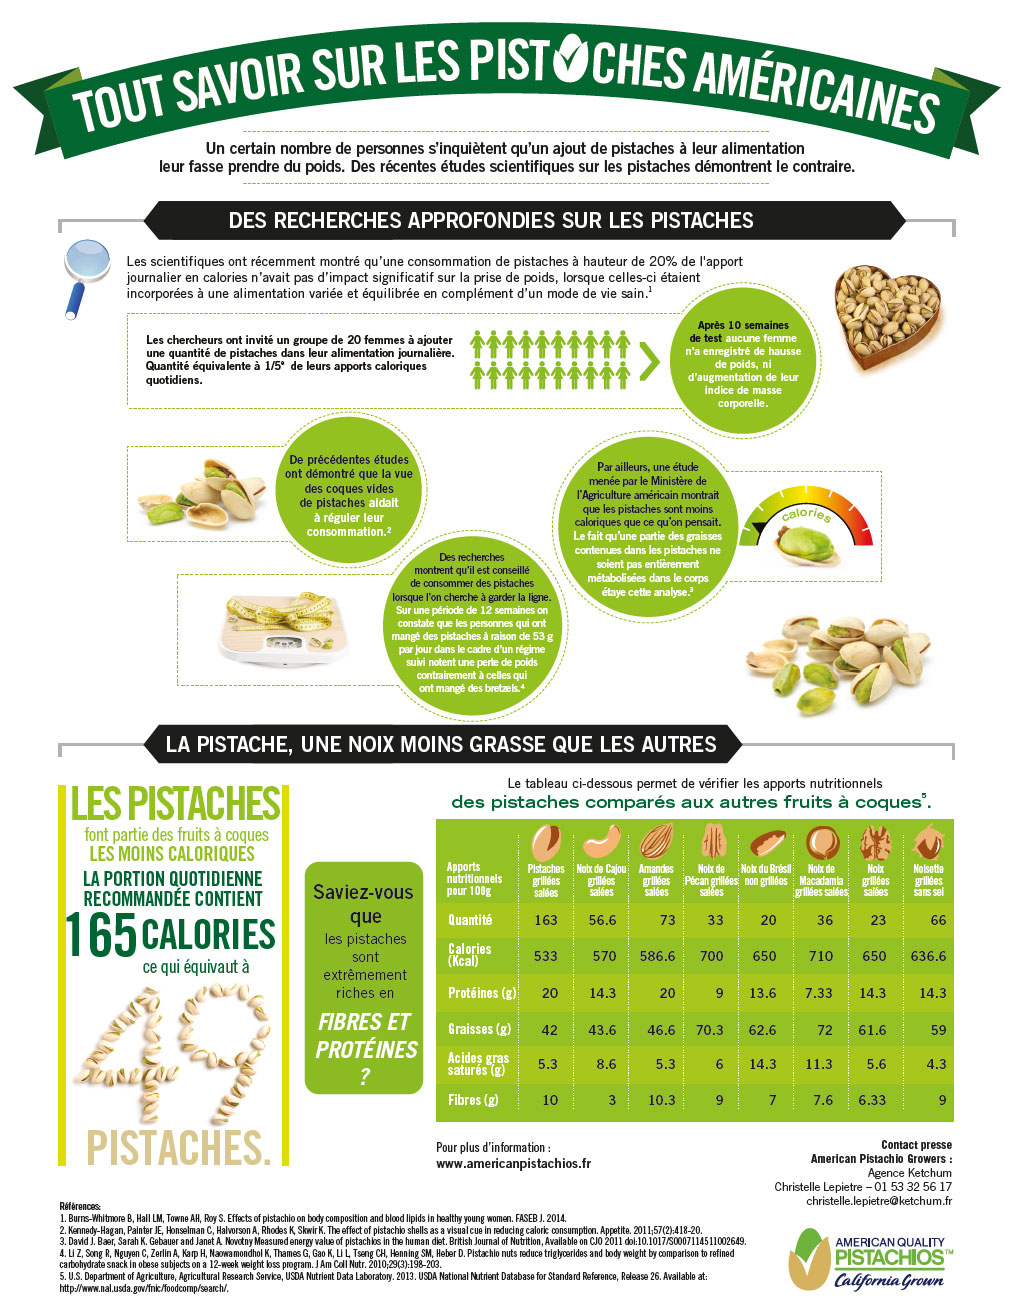 The Skinny On Pistachios Infographic